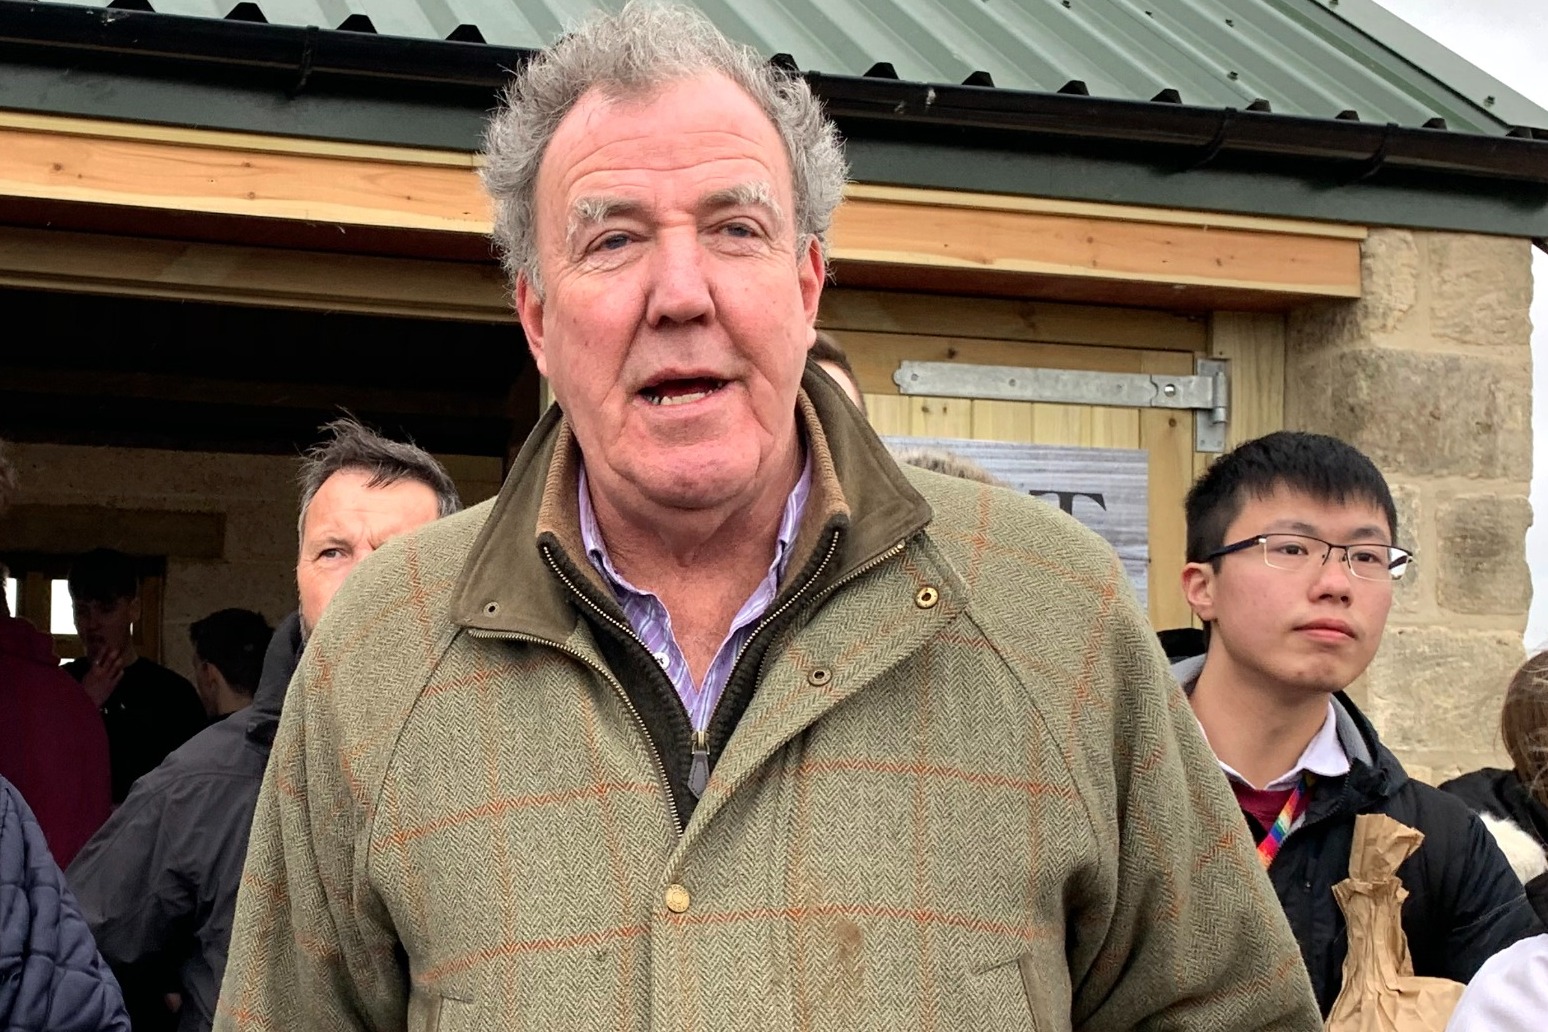 More than 60 MPs write to The Sun editor condemning Jeremy Clarkson article 